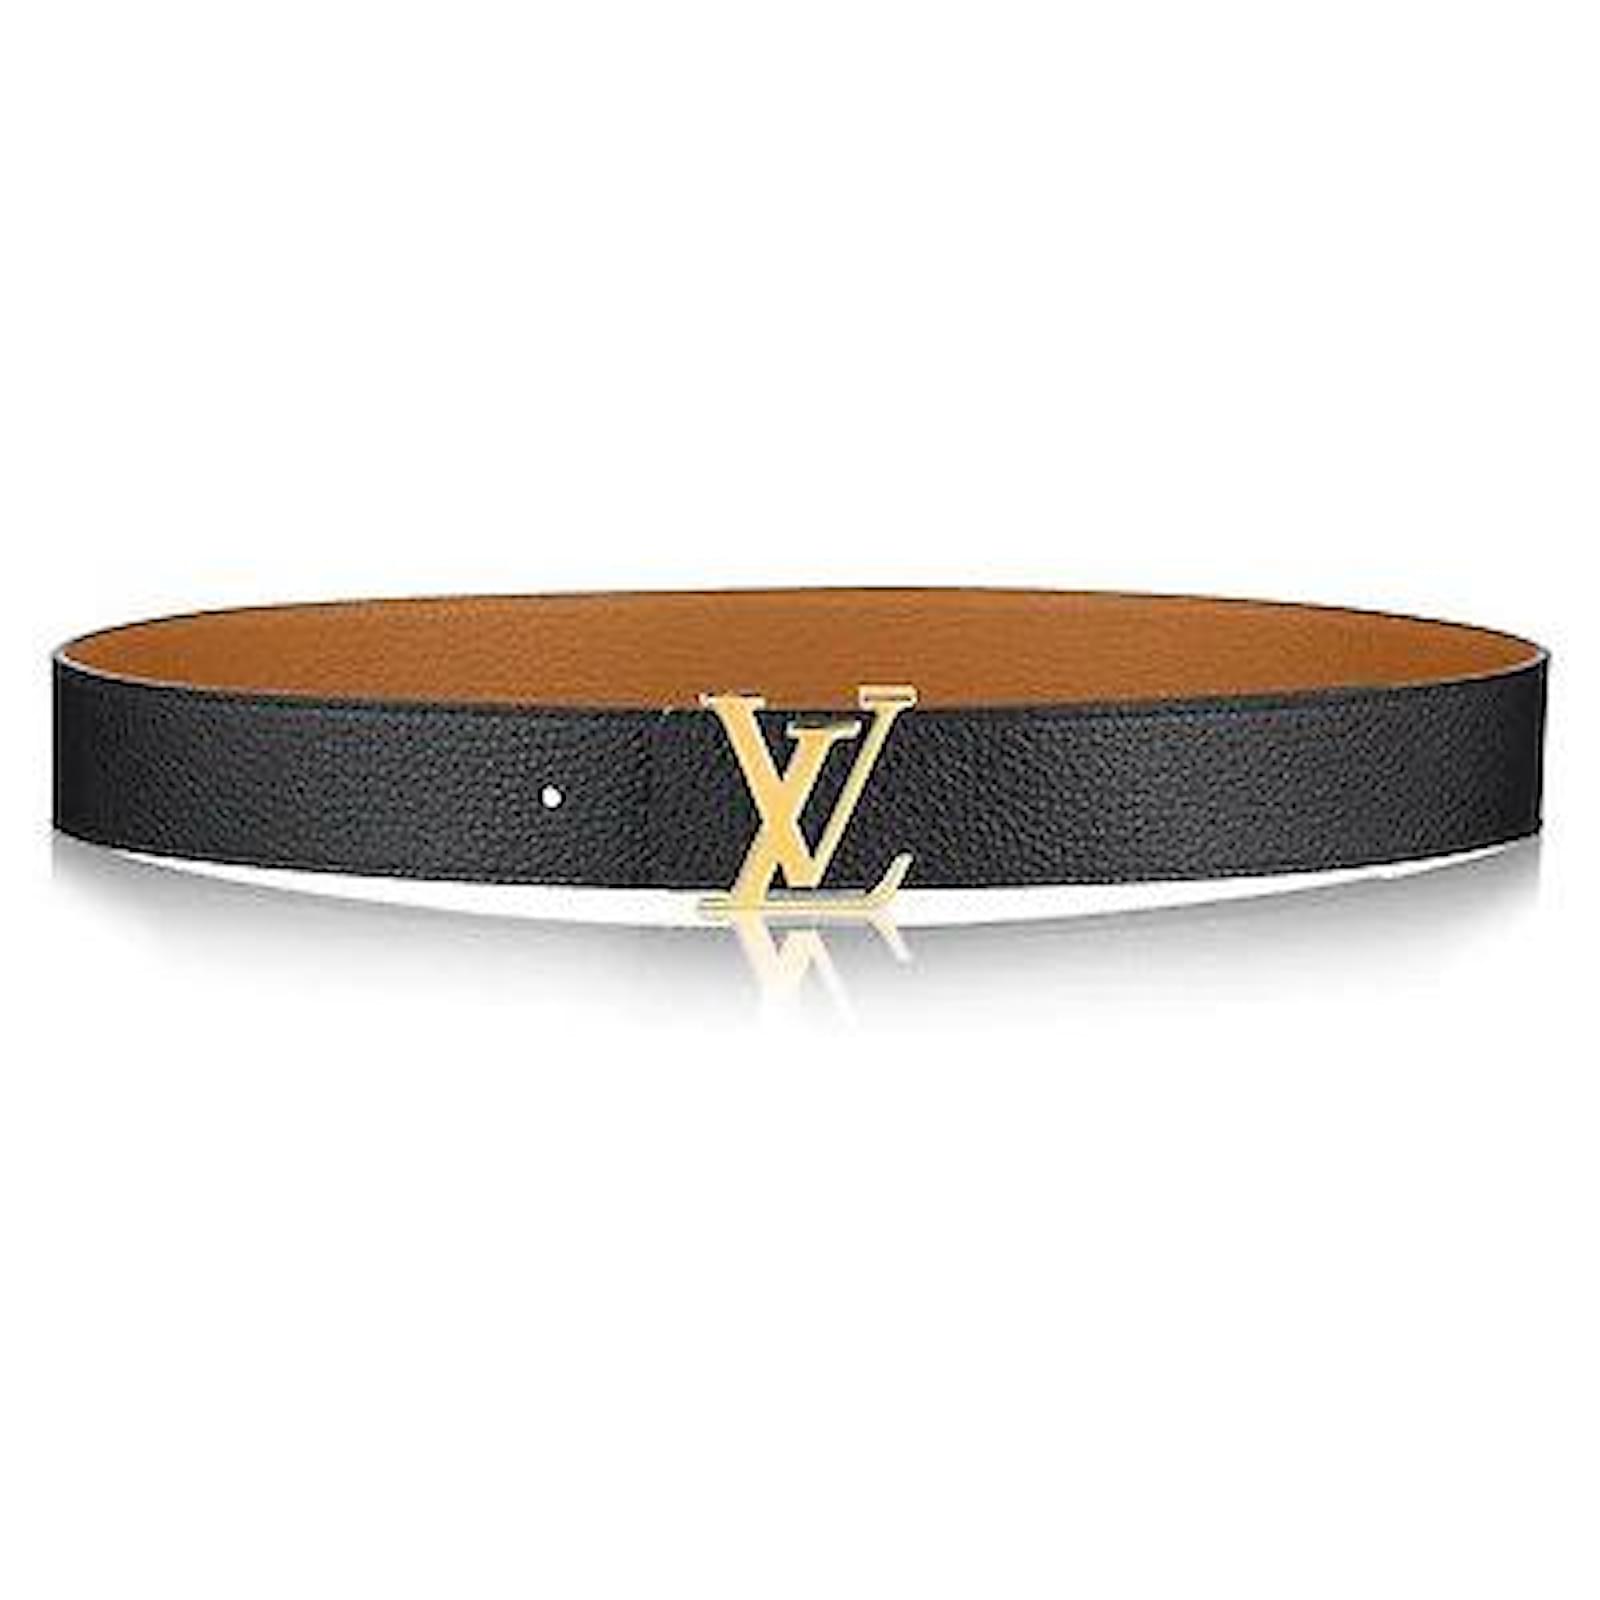 Louis Vuitton Leather Initiales Belt in black calf leather leather